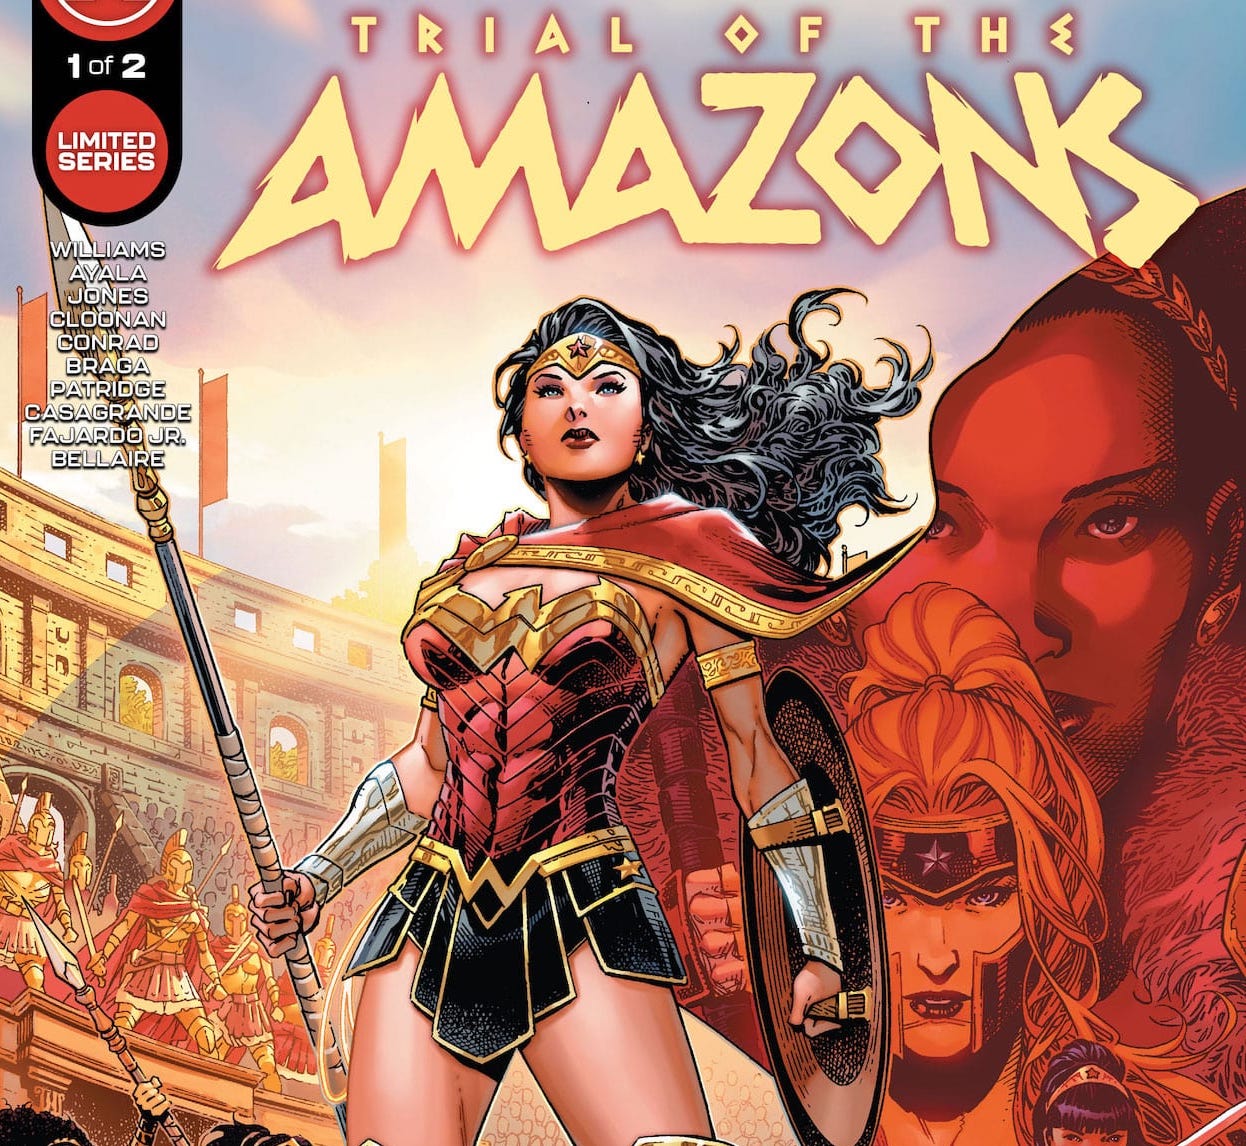 'Trial of the Amazons' #1 is an engrossing start